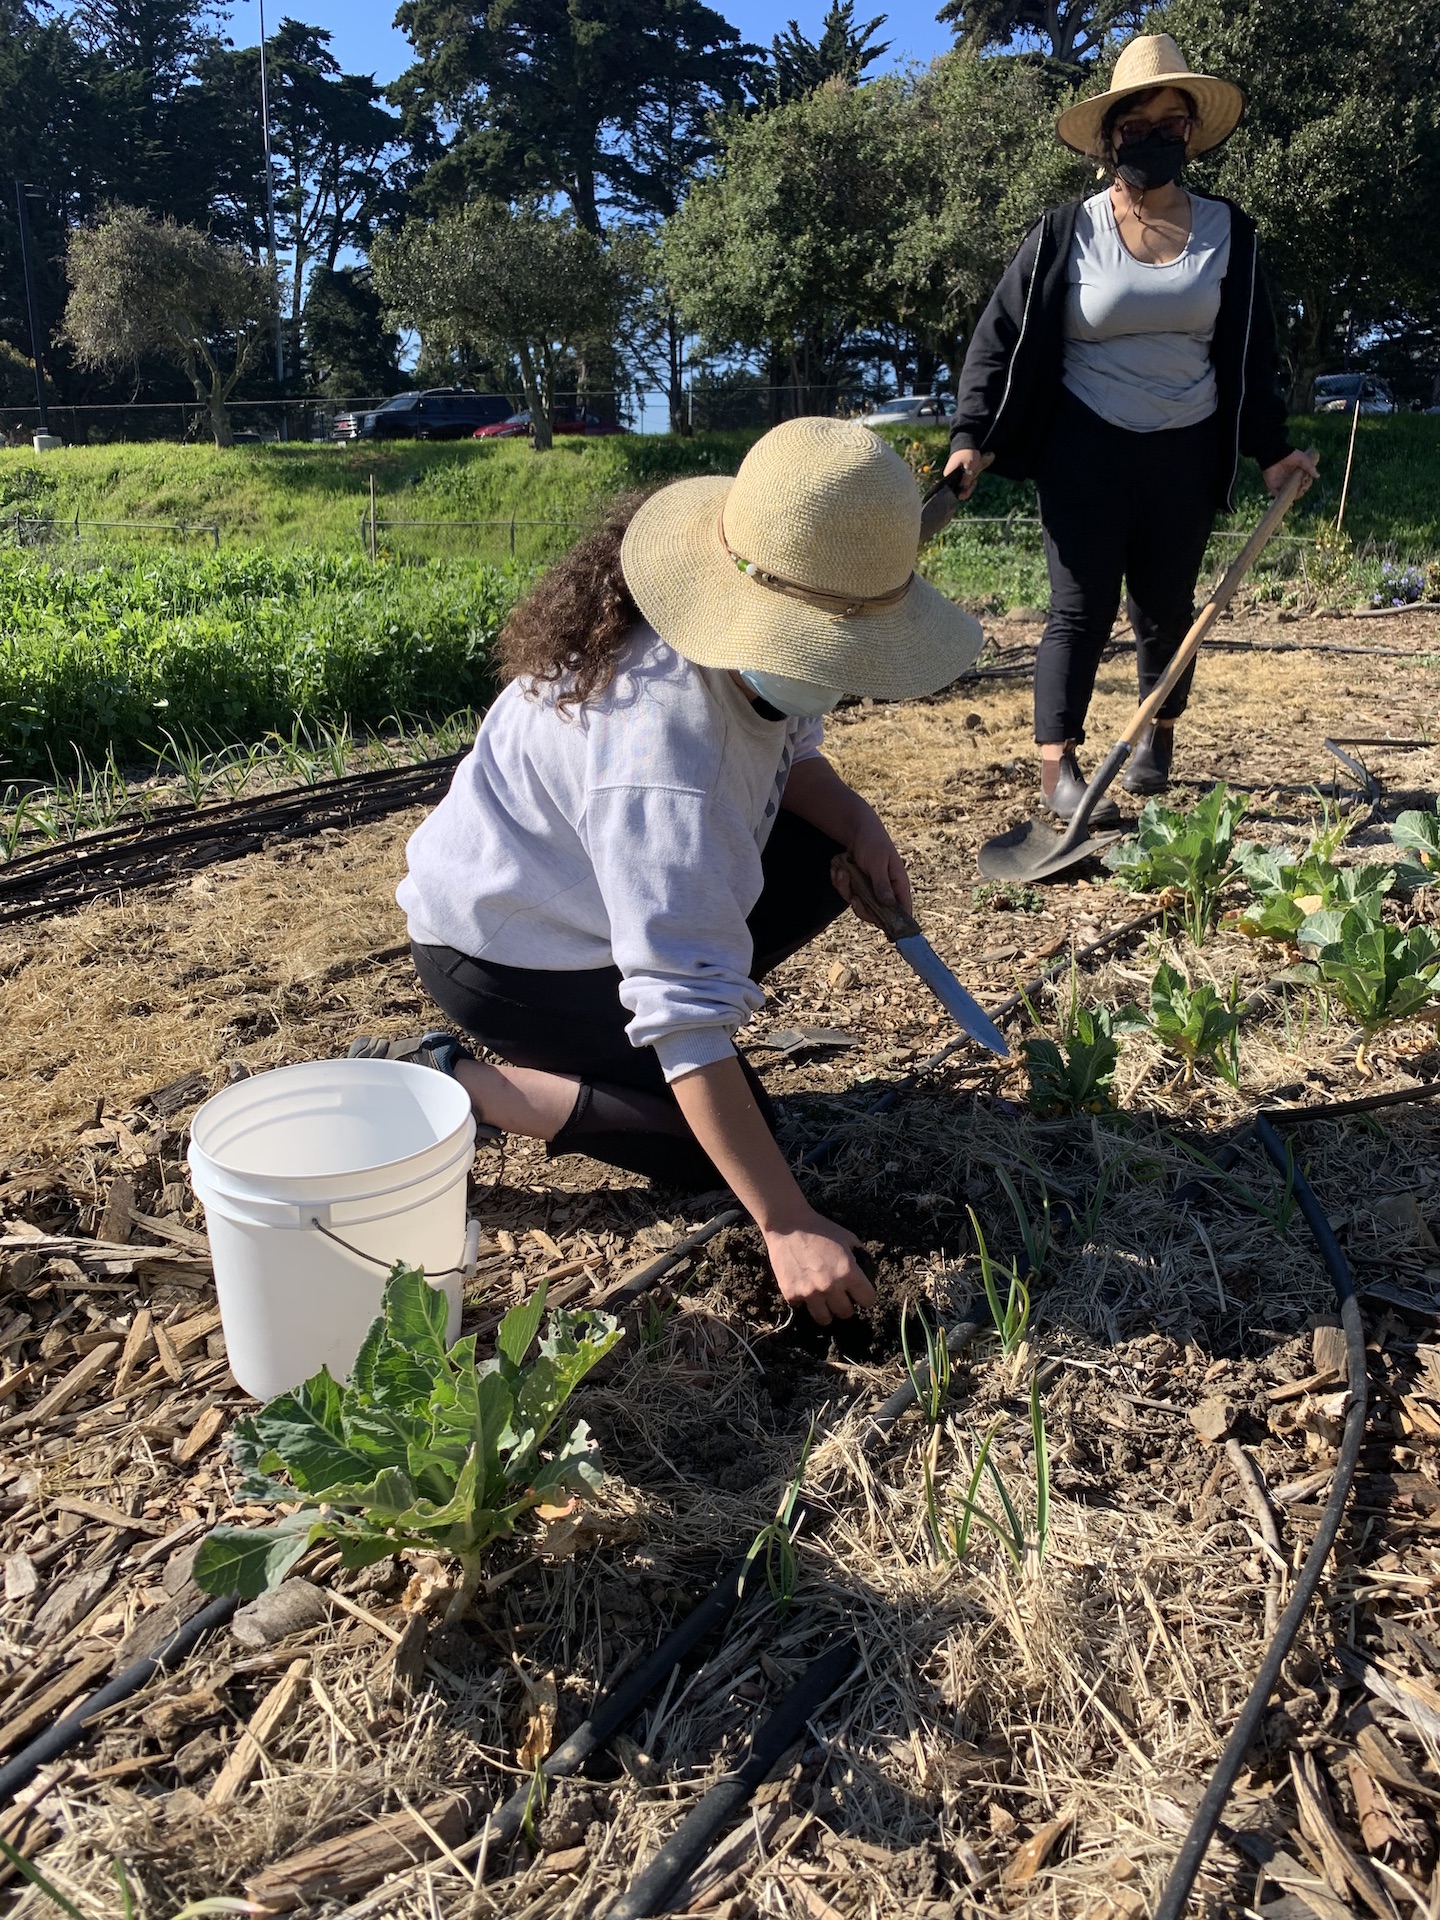 An image of two women in their 20's/30's working in a row of plants. They are wearing wide brimmed gardening hats and casual clothing. One pulls weeds with a bucket next to her.